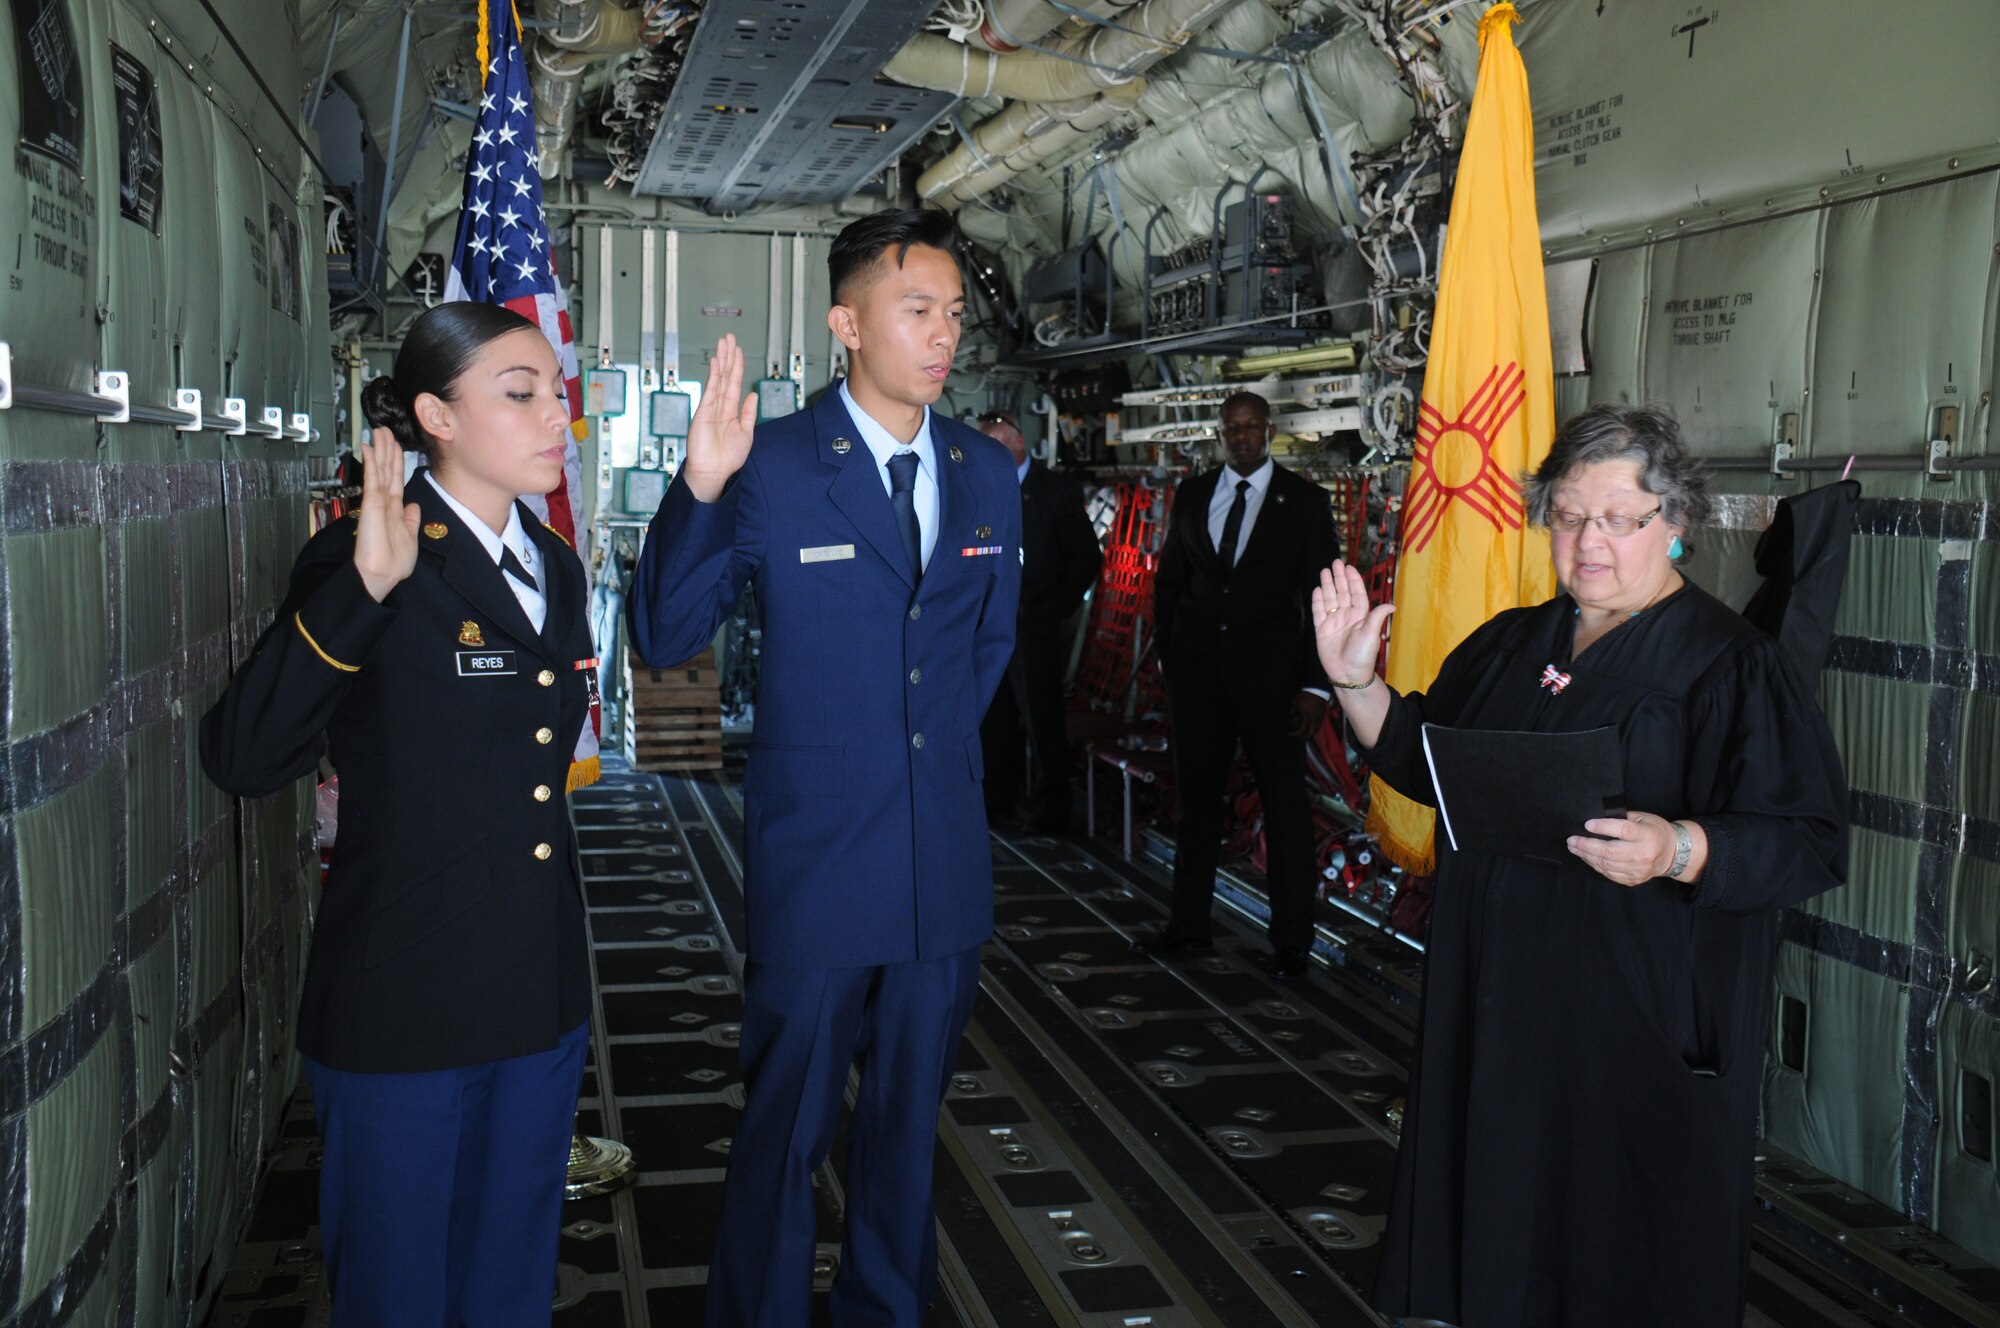 Private 1st Class Diana Guadalupe Reyes Manriquez, of the New Mexico National Guard's 1116th Transportation Company, and Airman 1st Class Aaron Matulac, of the 27th Special Operations Wing at Cannon Air Force Base, take the oath of U.S. citizenship as administered by U.S. Magistrate Judge Christina Armijo on an aircraft at the Kirtland Air Force Base 75th anniversary air show June 4. (Photo by Dennis Carlson)